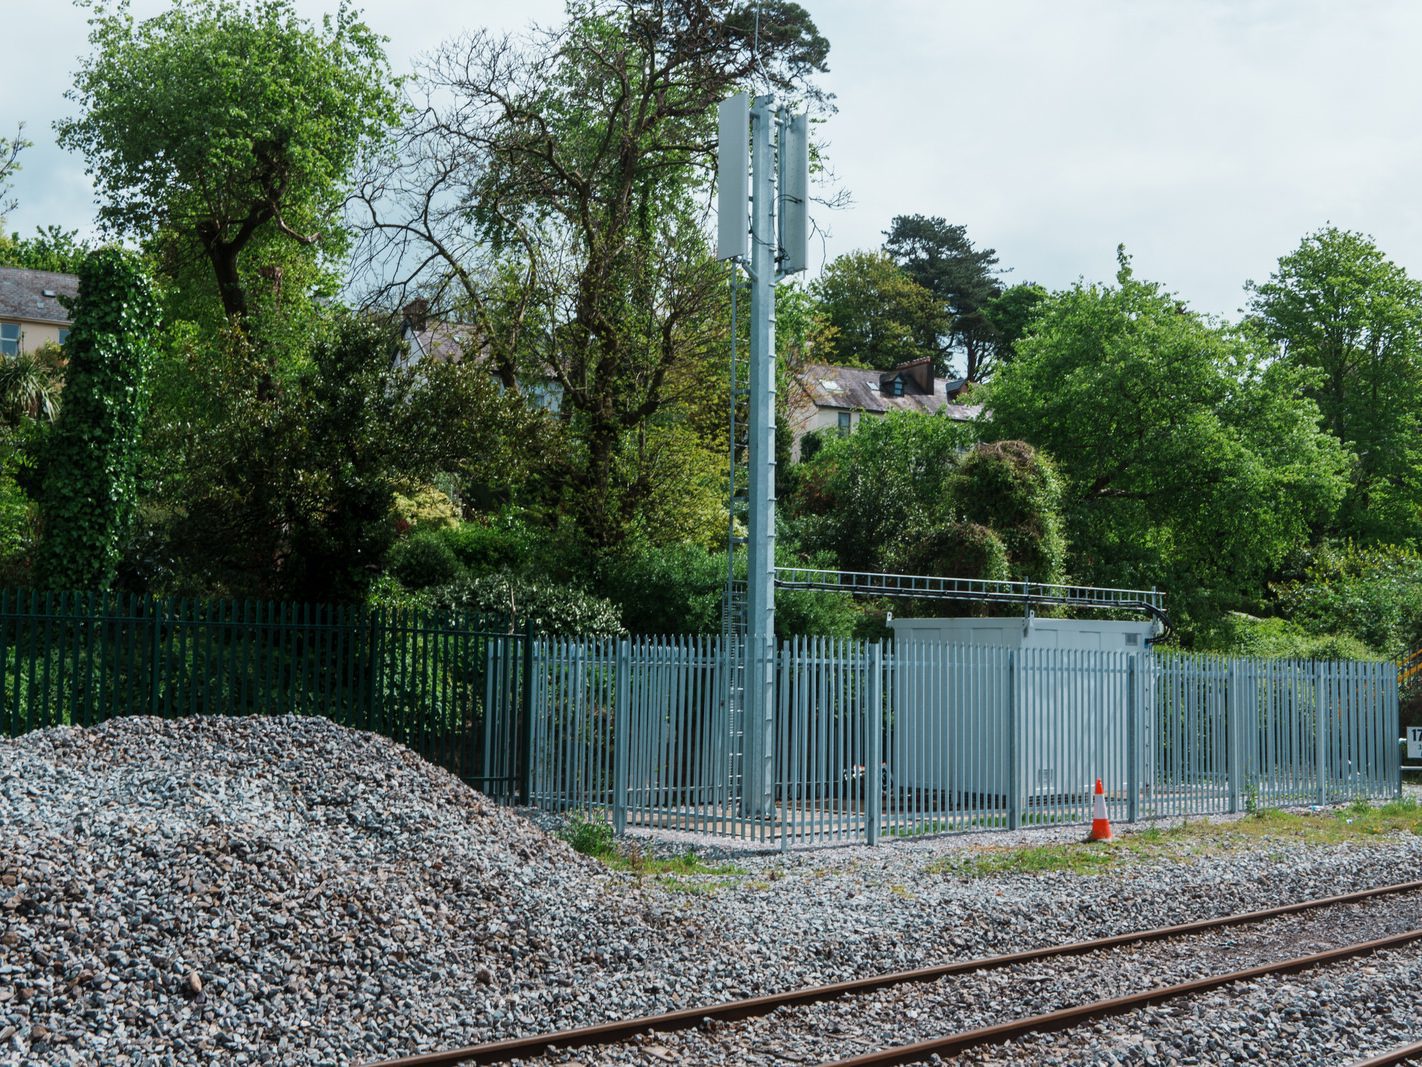 RAILWAY STATION AT RUSHBROOKE IN CORK [CORK TO COBH LINE] 002